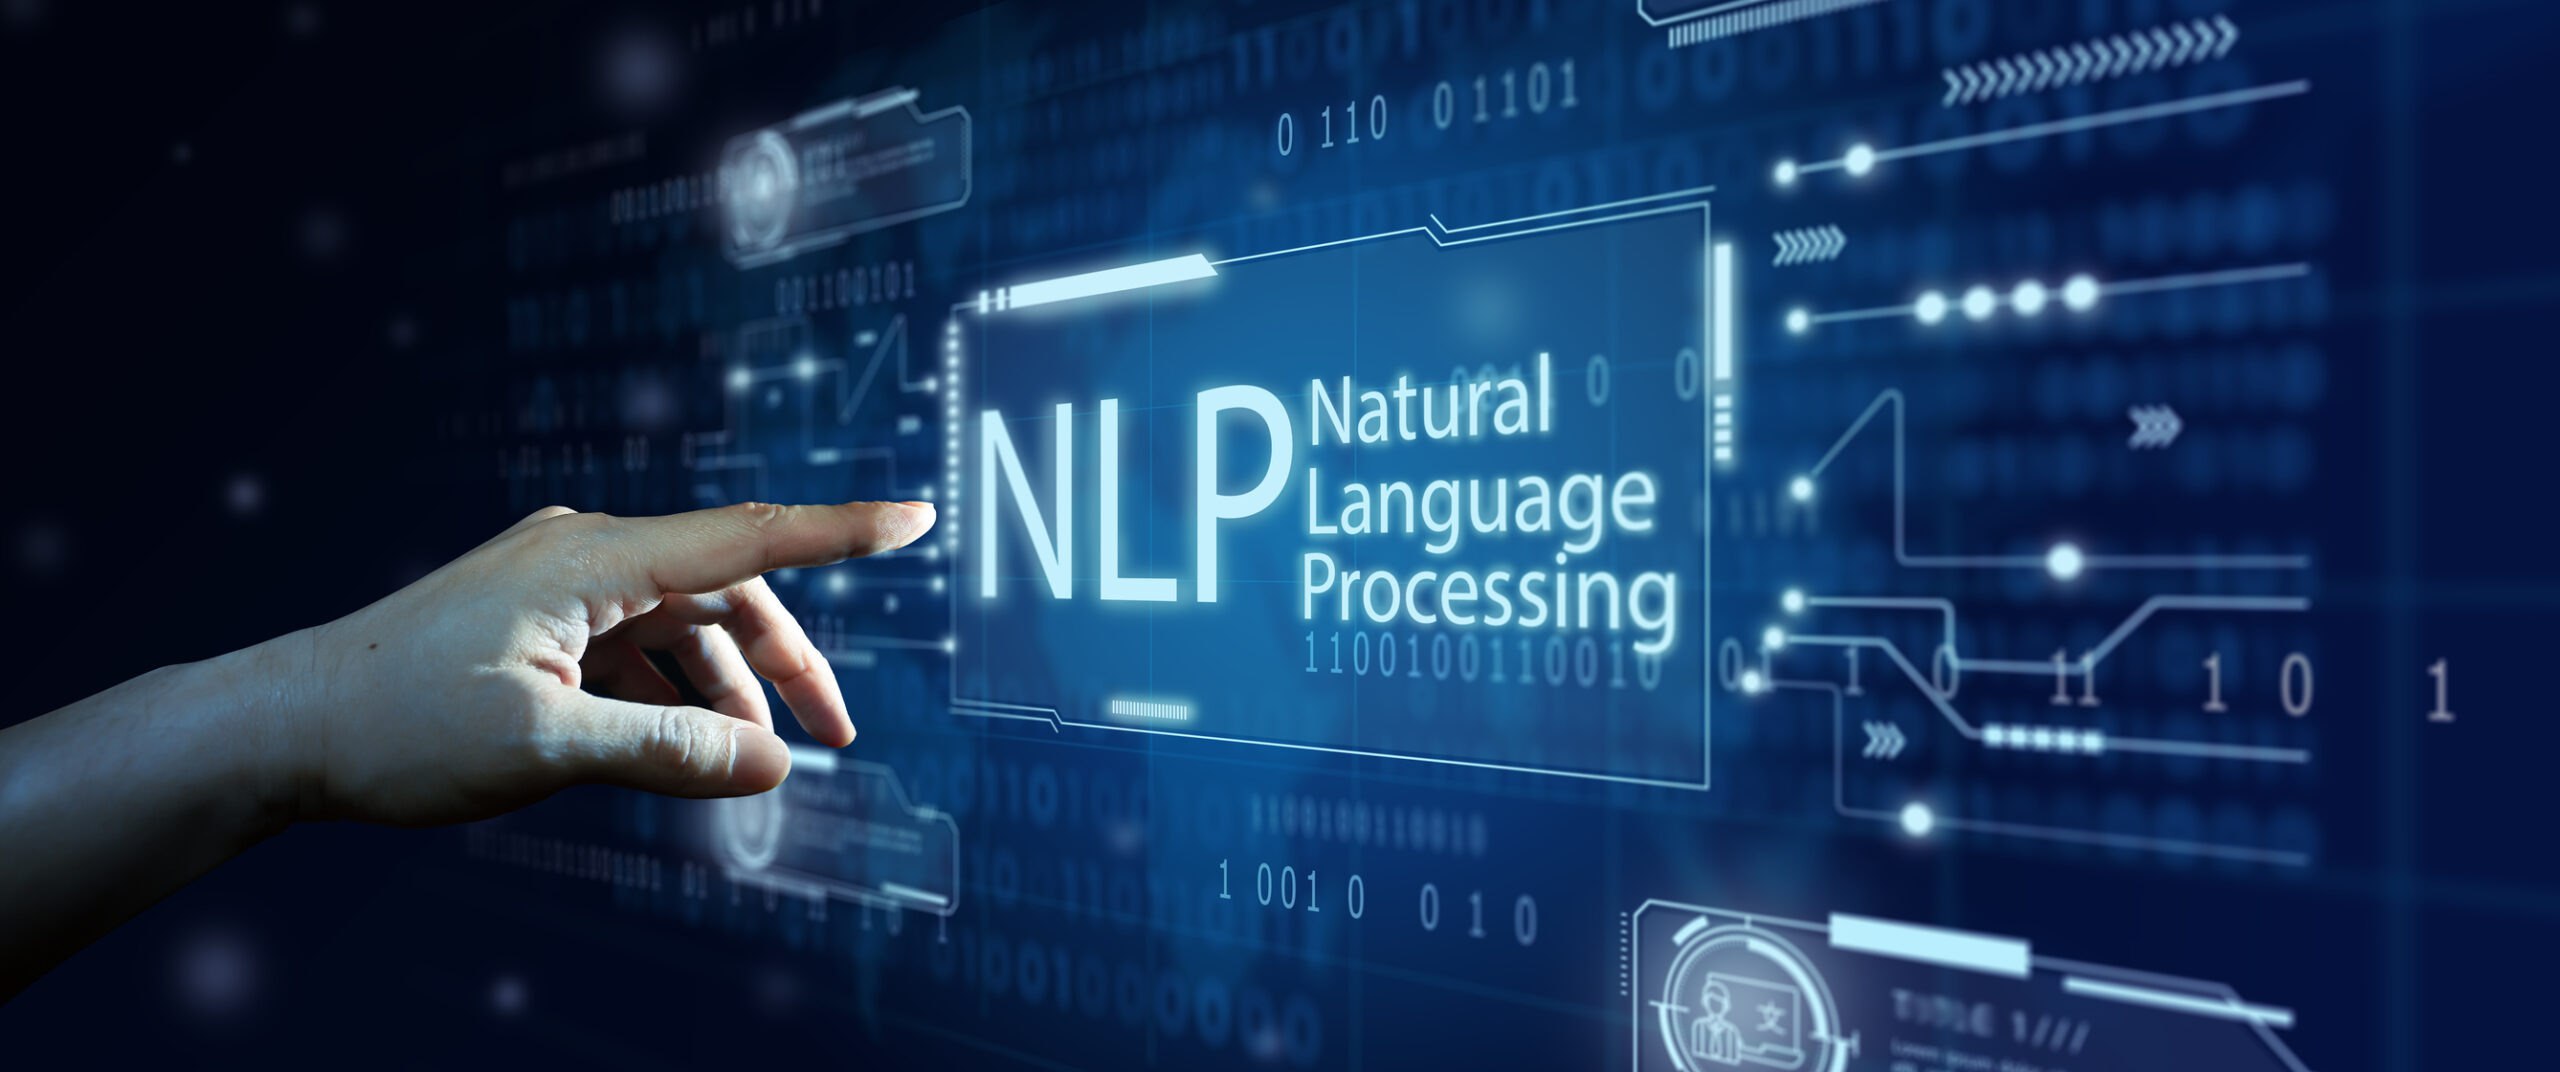 3 reasons Why Natural Language Processing Will go Mainstream This Year